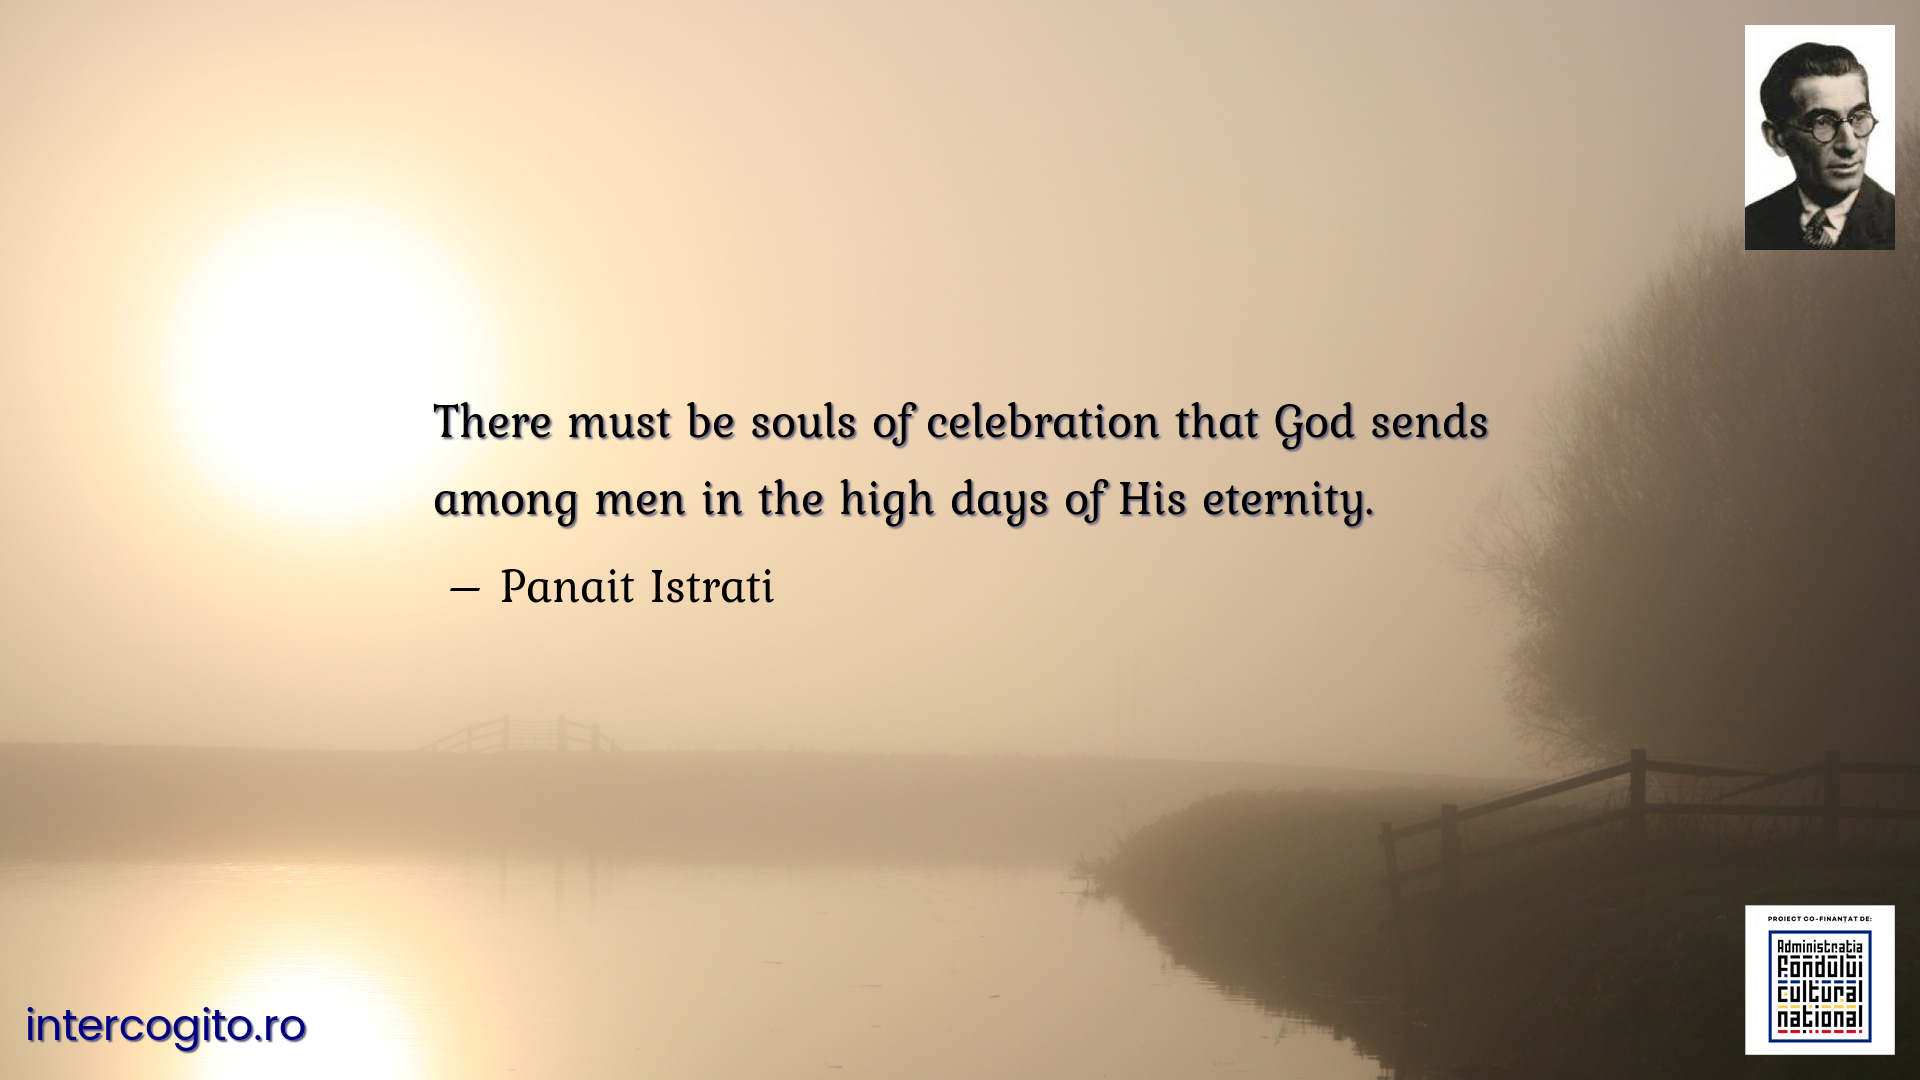 There must be souls of celebration that God sends among men in the high days of His eternity.